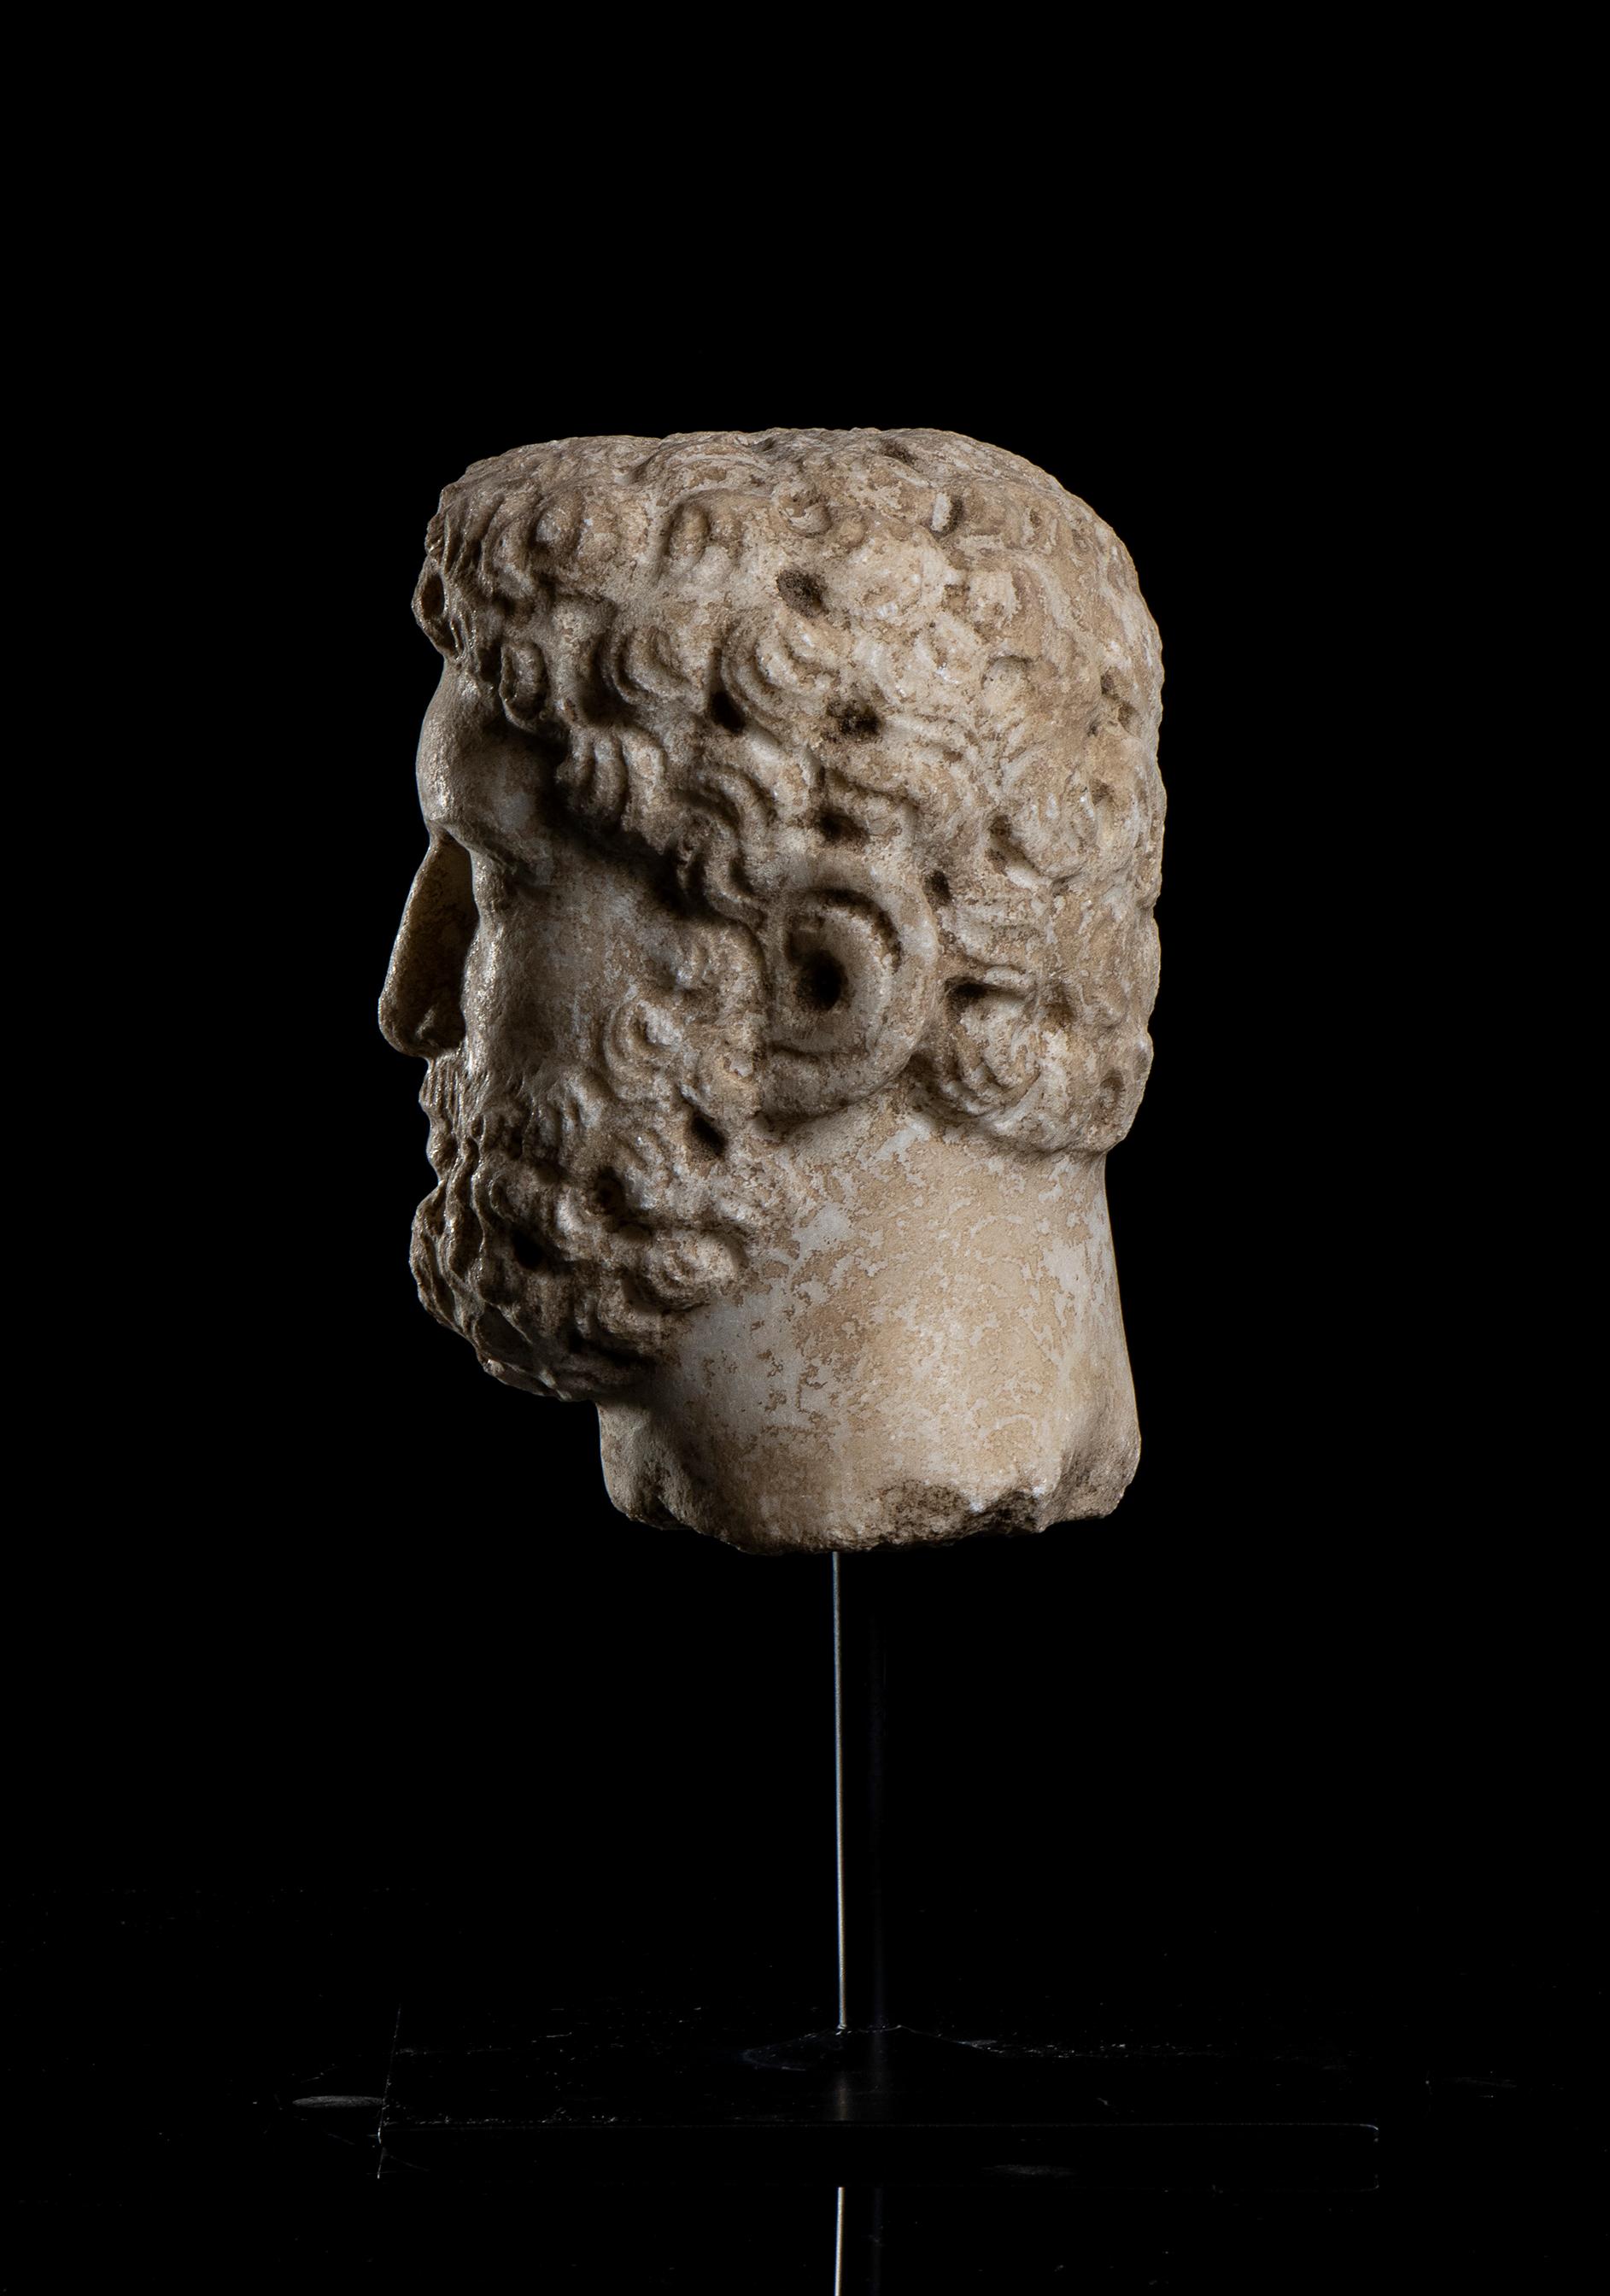 A white marble hand carved head, depicting the portrait of the  Roman Emperor Caracalla, Rome 20th century .
The sculpture standing on a black metal square base with a central pin present a detailed work with an interesting study of detail, clearly